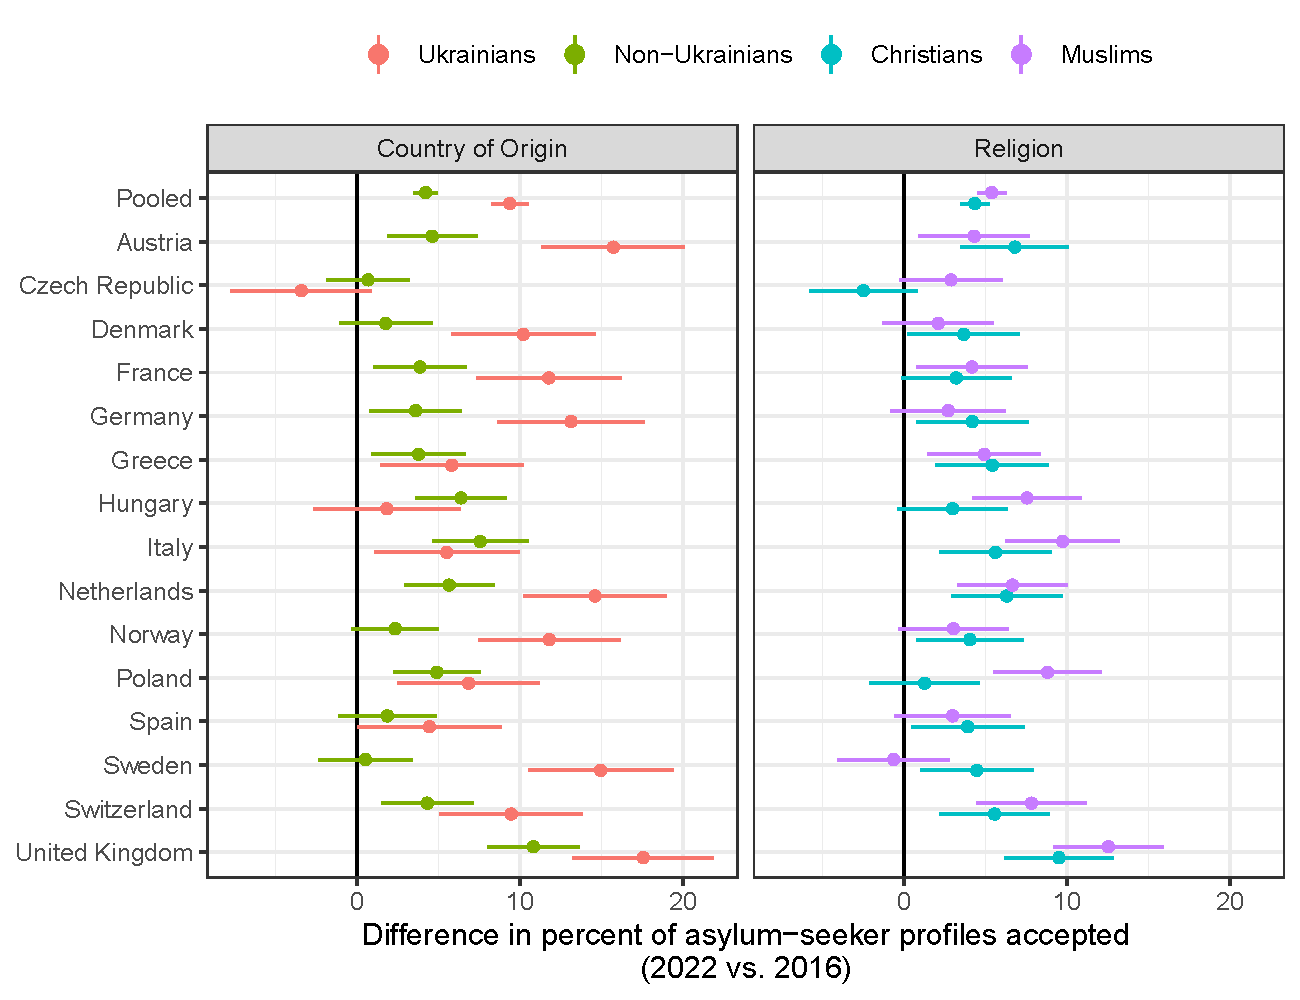 Enlarged view: Comparison of acceptance towards Ukrainian and non-Ukrainian asylum seekers of different European countries as well as comparison between Muslims and Christians.